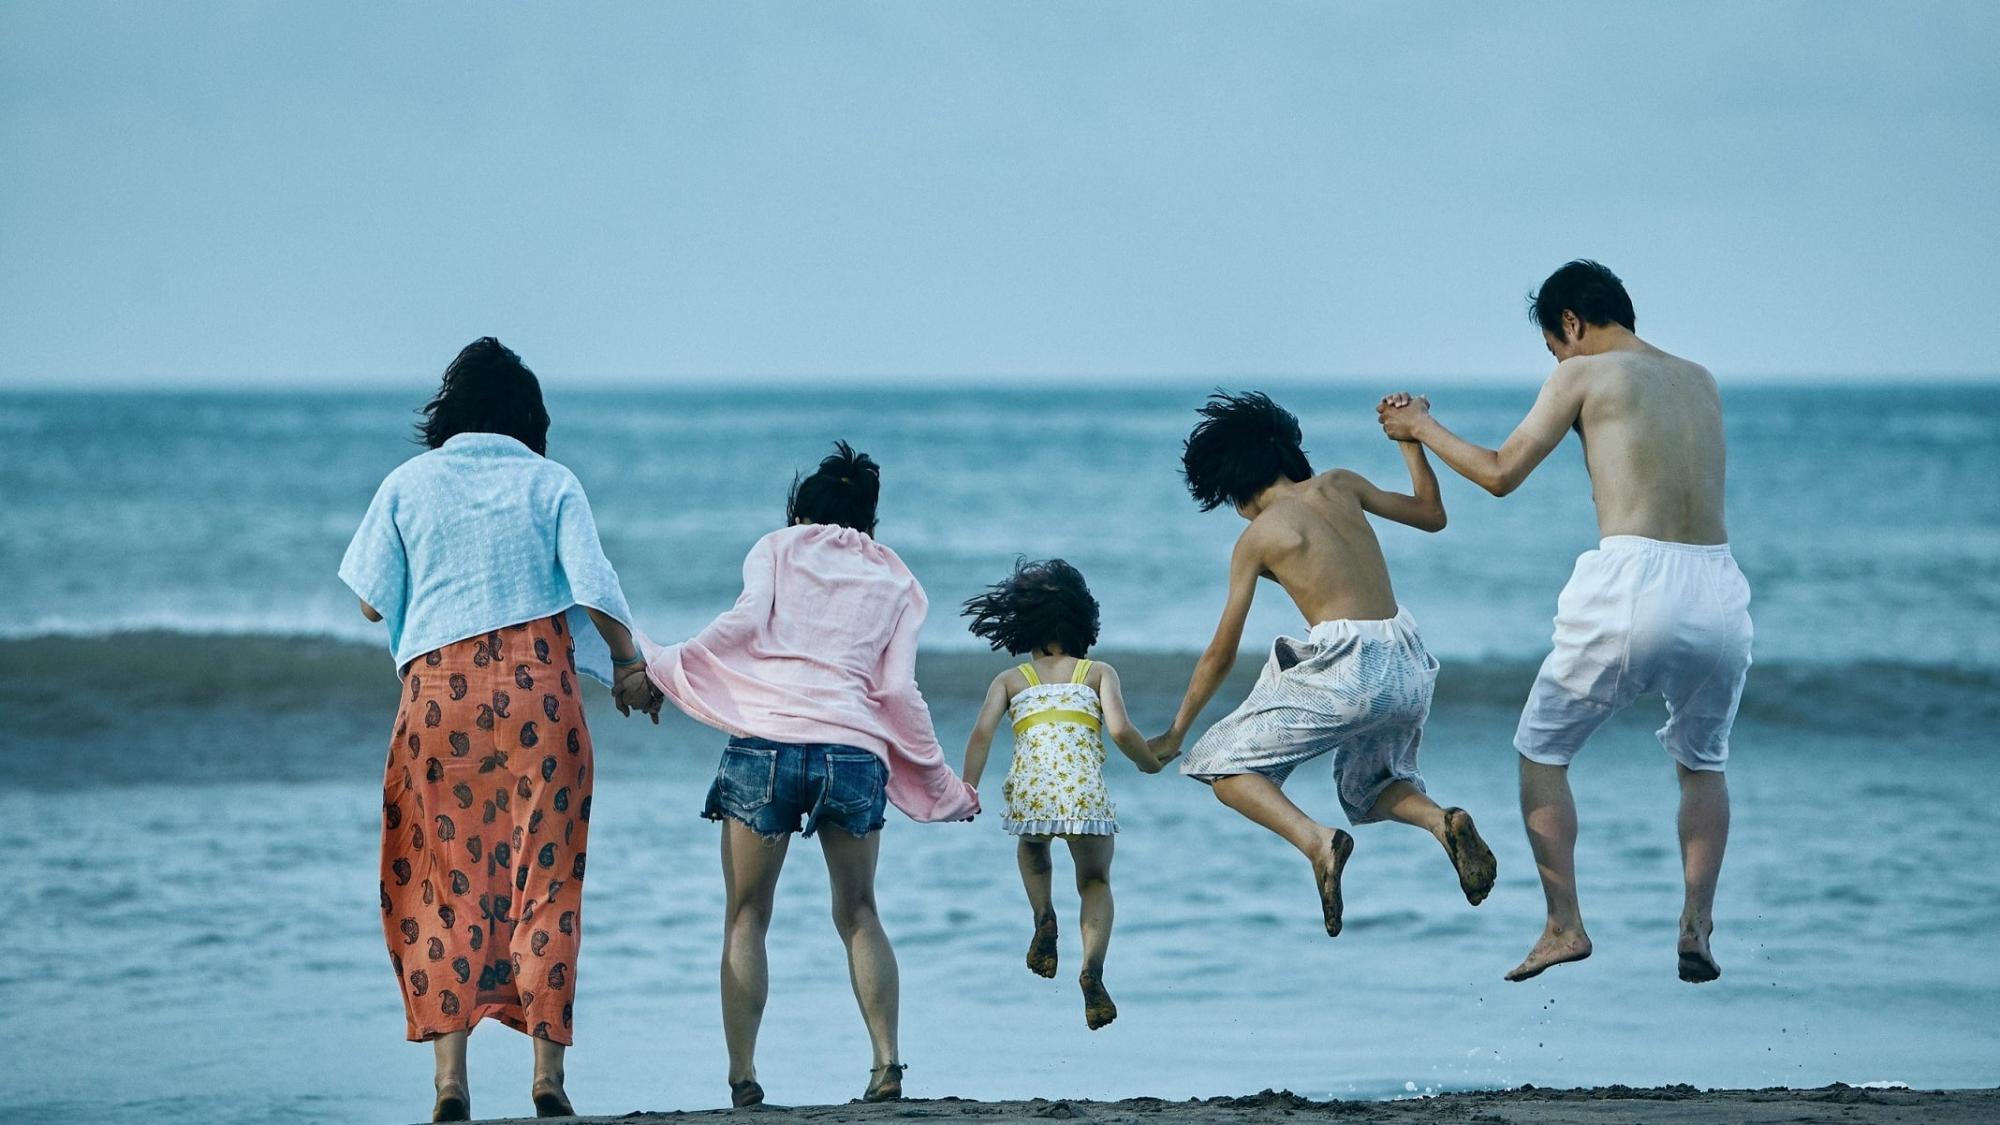 Backdrop Image for Shoplifters